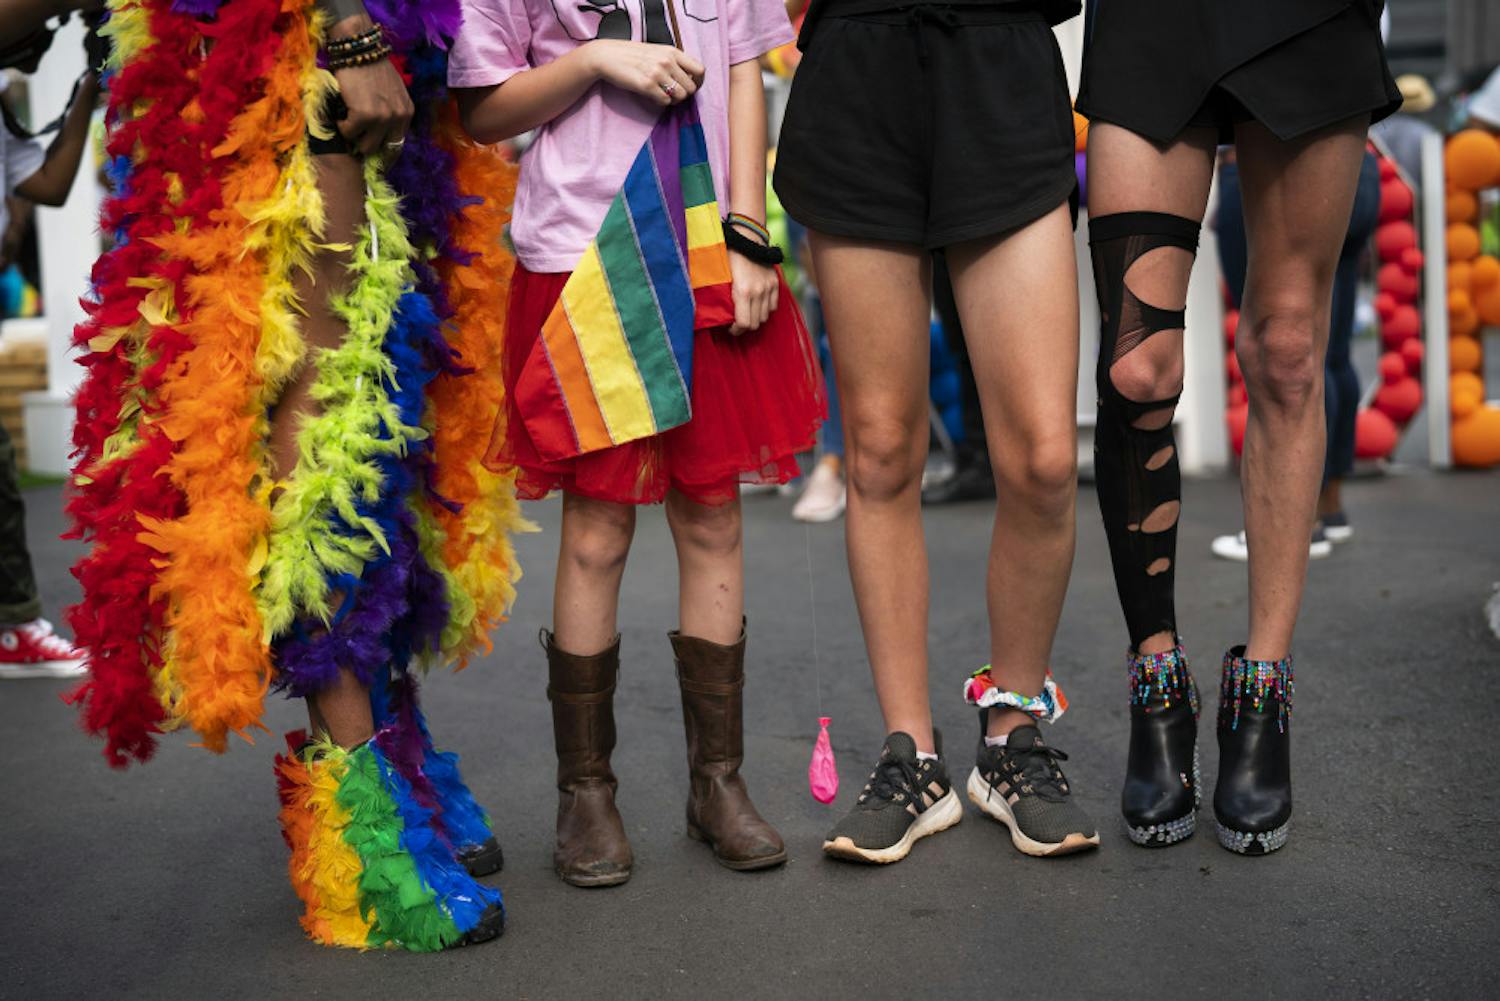 The legs of costumed people participating in the annual Gay Pride event in Johannesburg, South Africa, Saturday Oct. 26, 2019. Thousands took part in this 30th edition of the Gay Pride. (AP Photo/Jerome Delay)